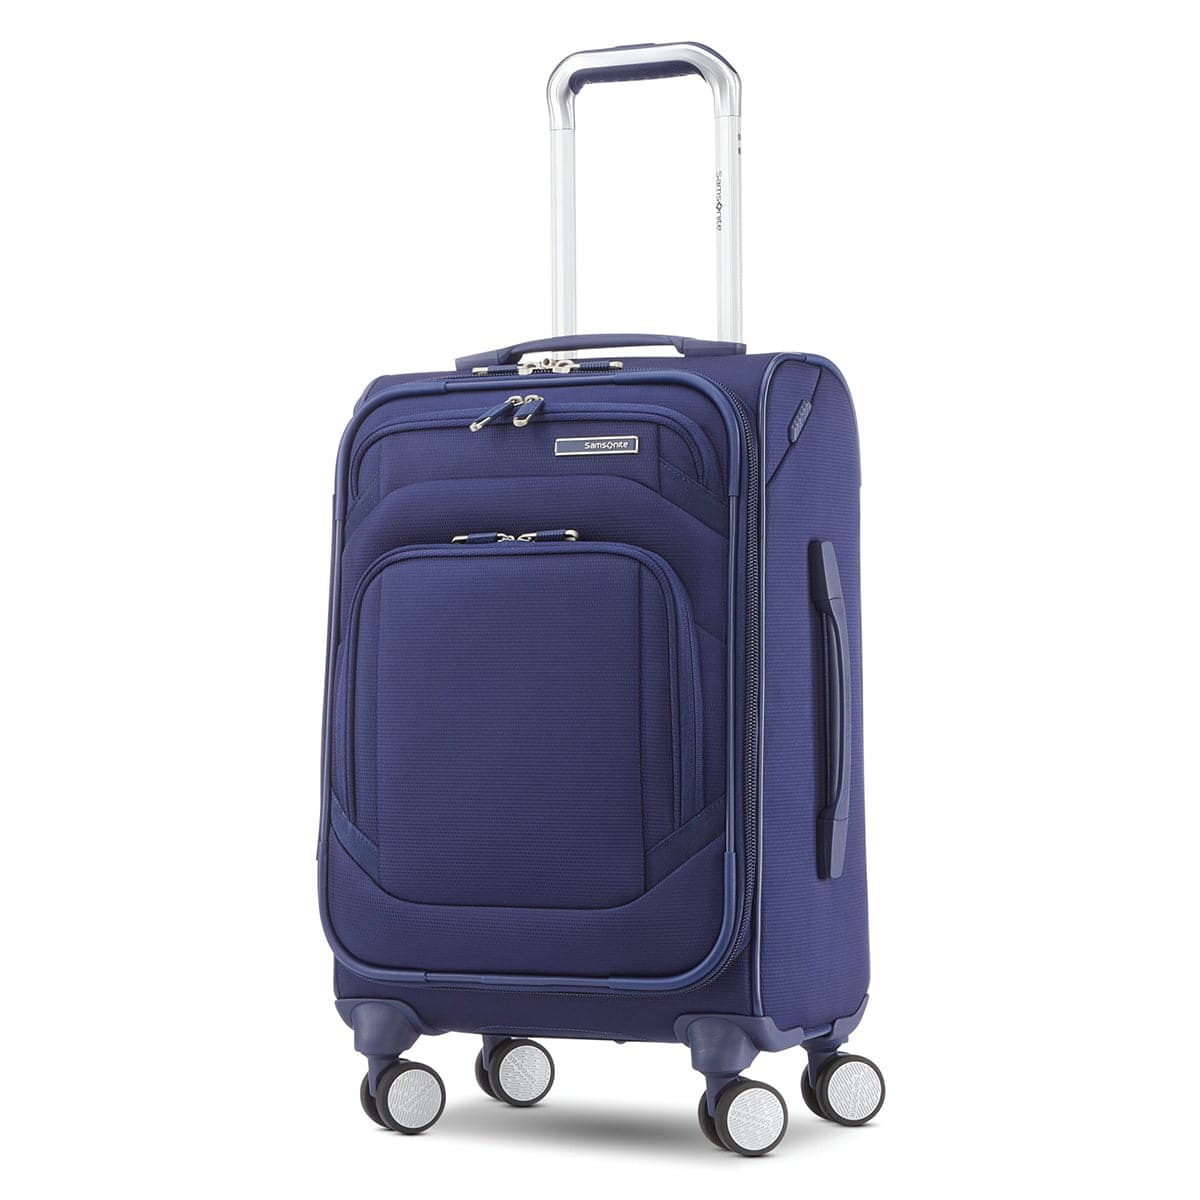 Samsonite Ascentra Softside 22" Spinner Carry-On Luggage